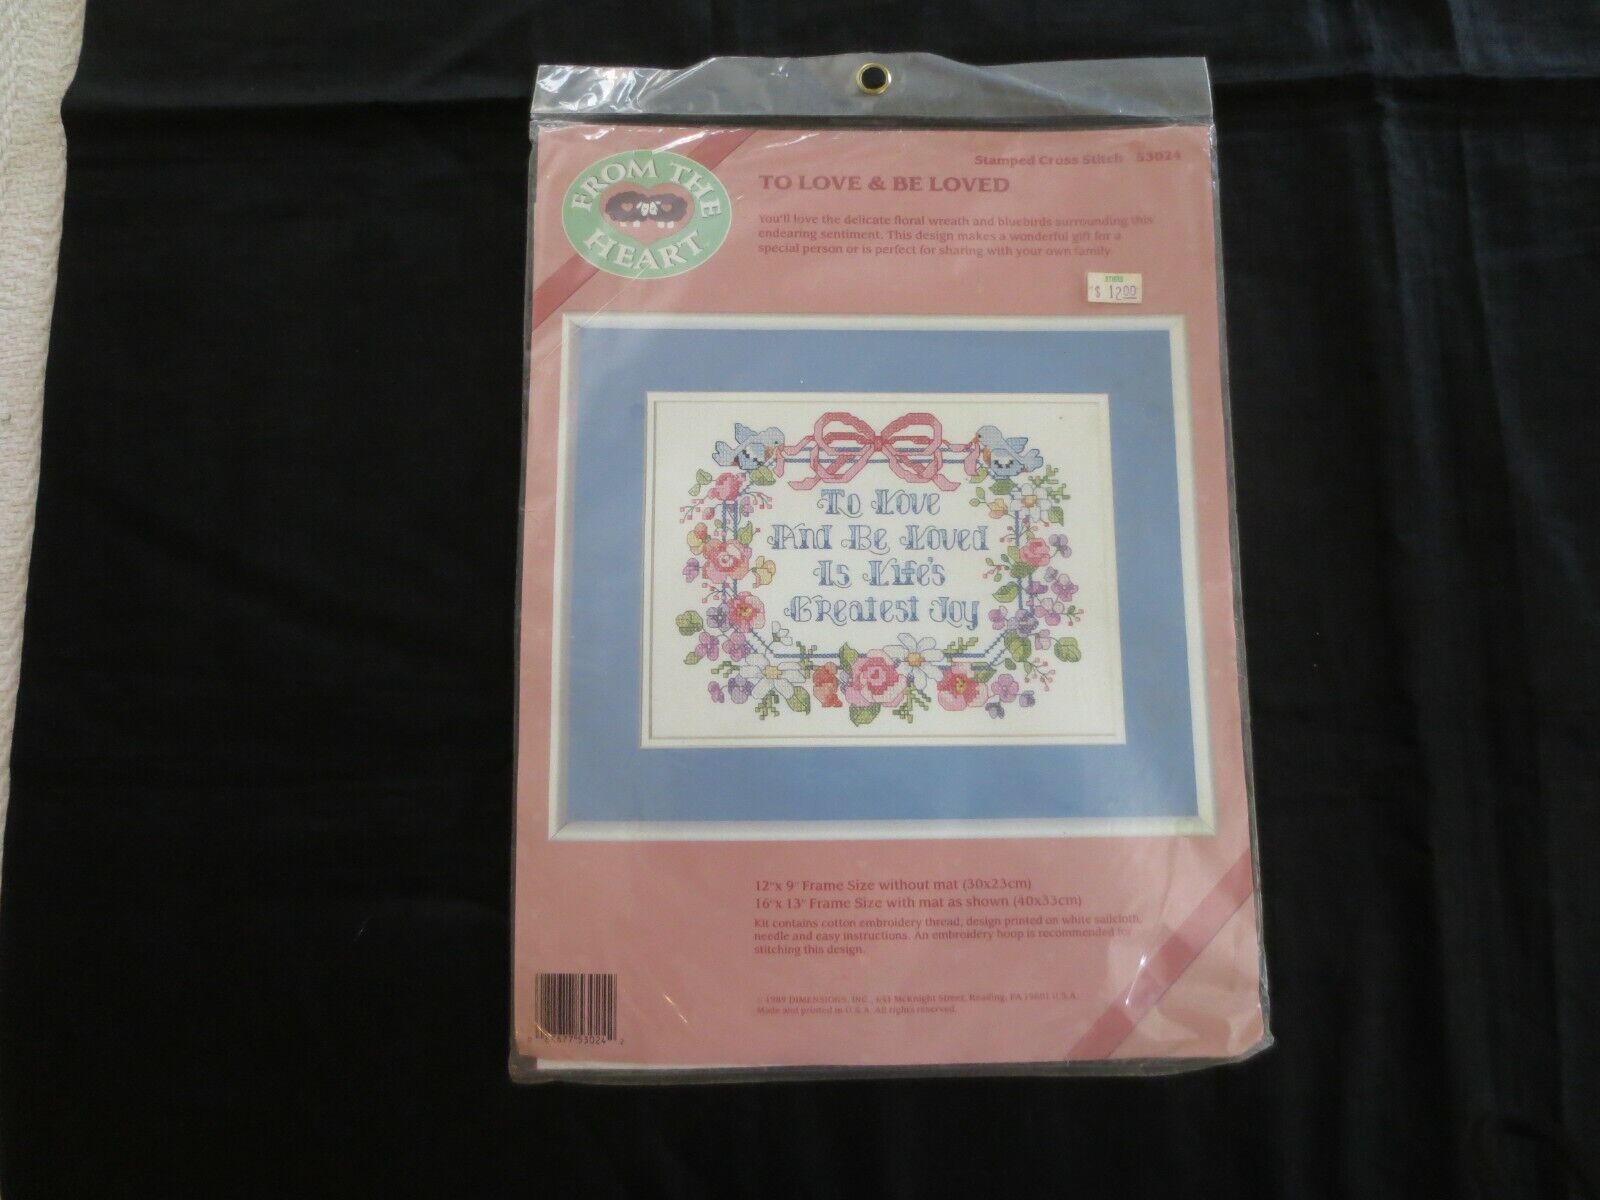 1989 Dimensions TO LOVE & BE LOVED Stamped Cross Stitch KIT #53024 - 12" x 9" - $15.00